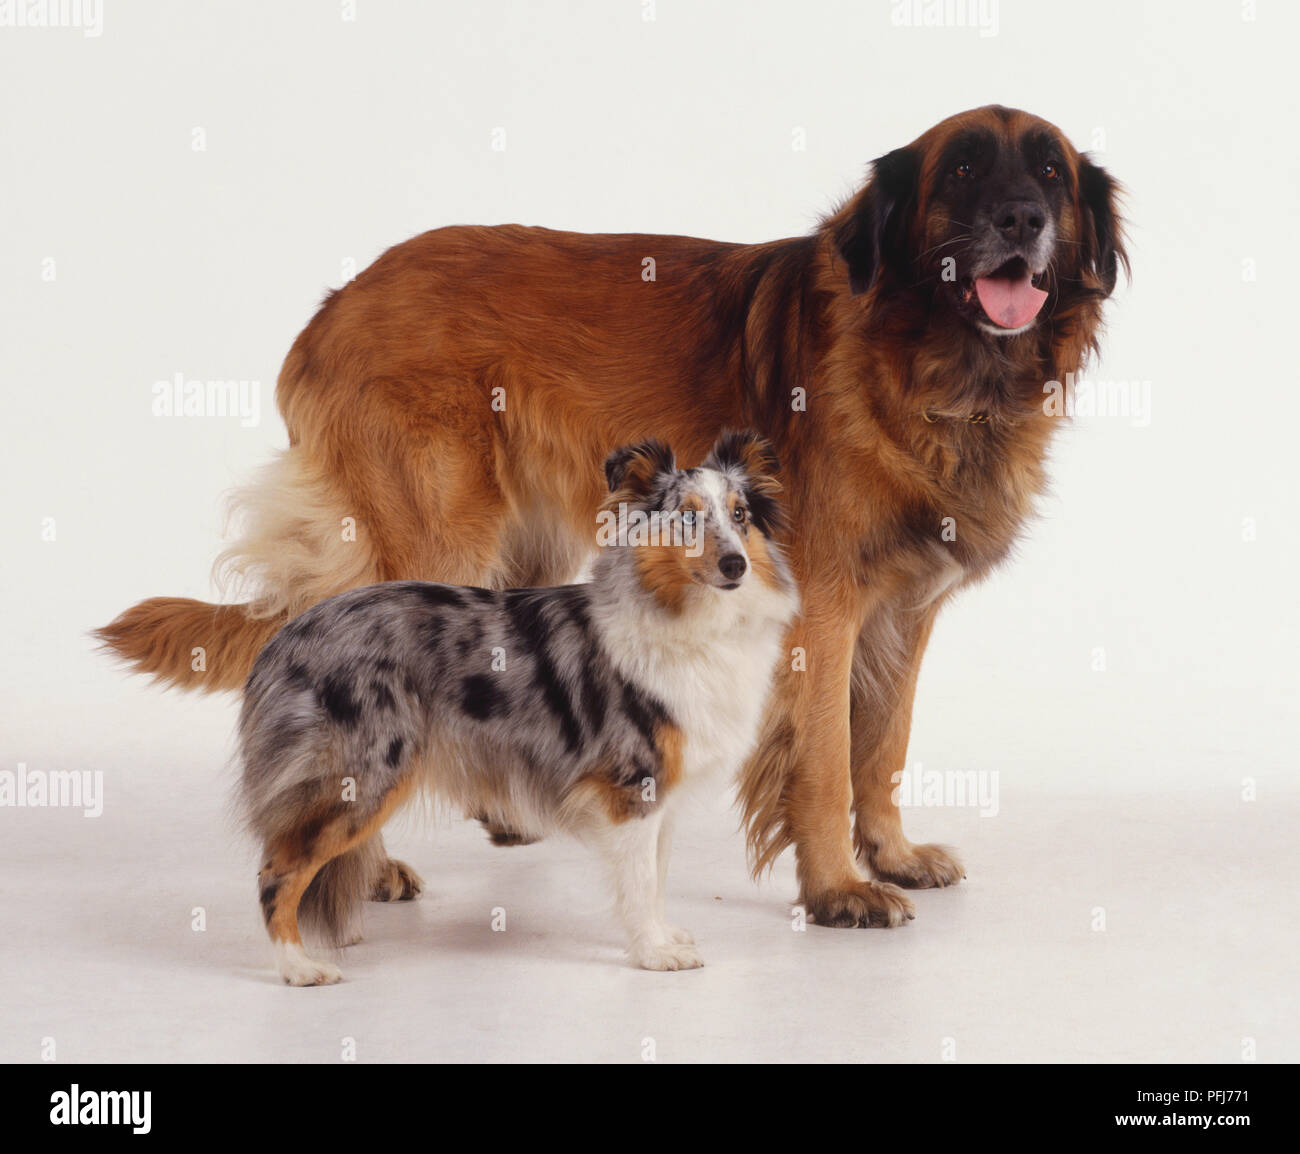 Estrela Mountain Dog and Rough Collie puppy (canis familiaris), side view. Stock Photo